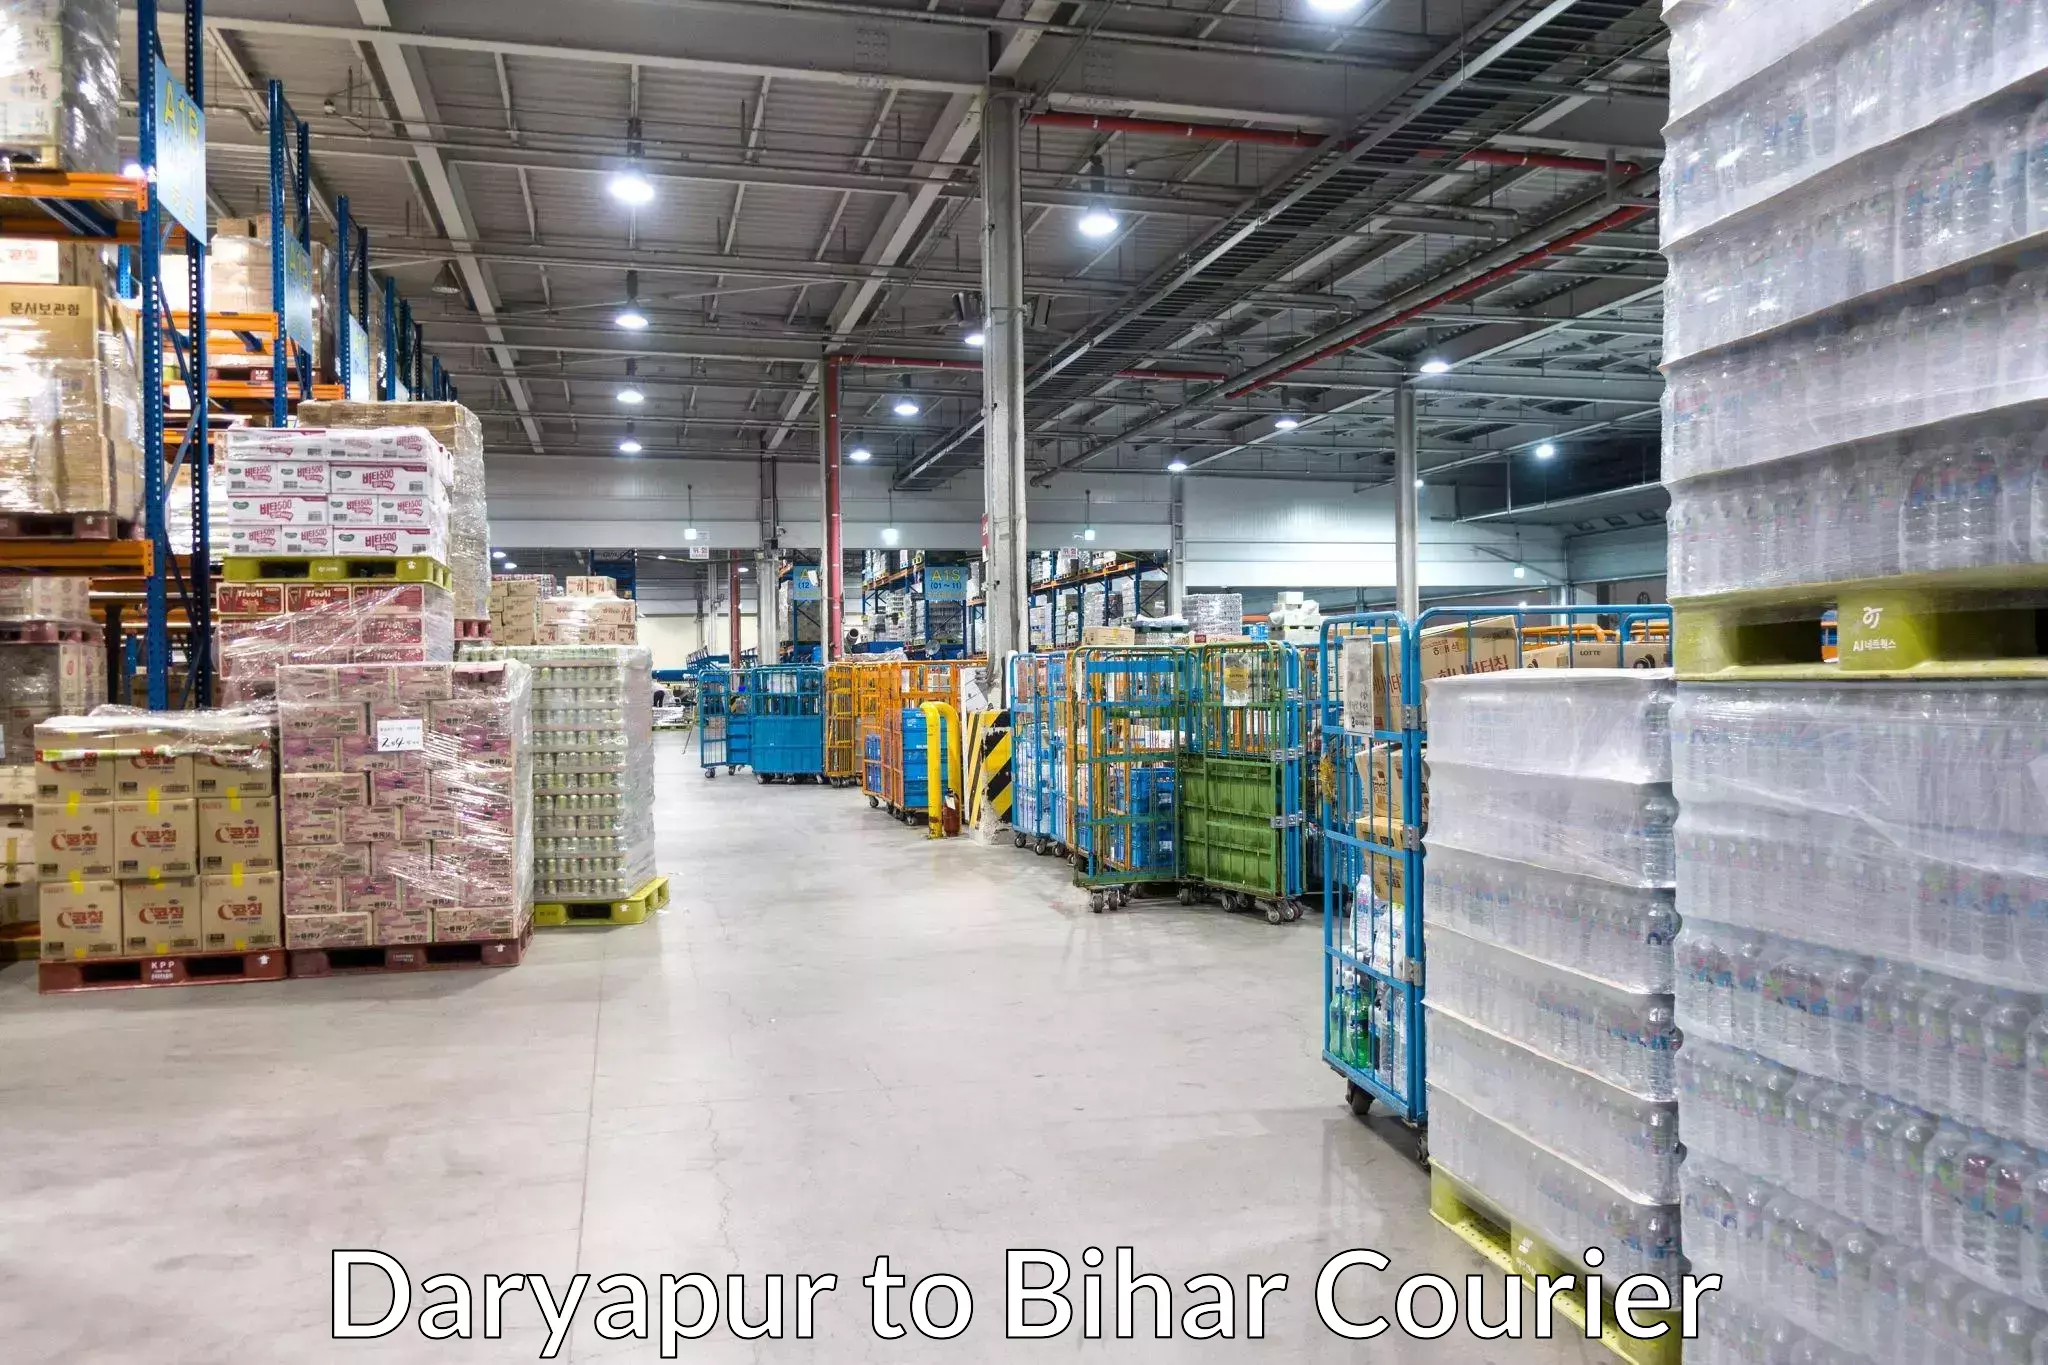 Comprehensive shipping network in Daryapur to Birpur